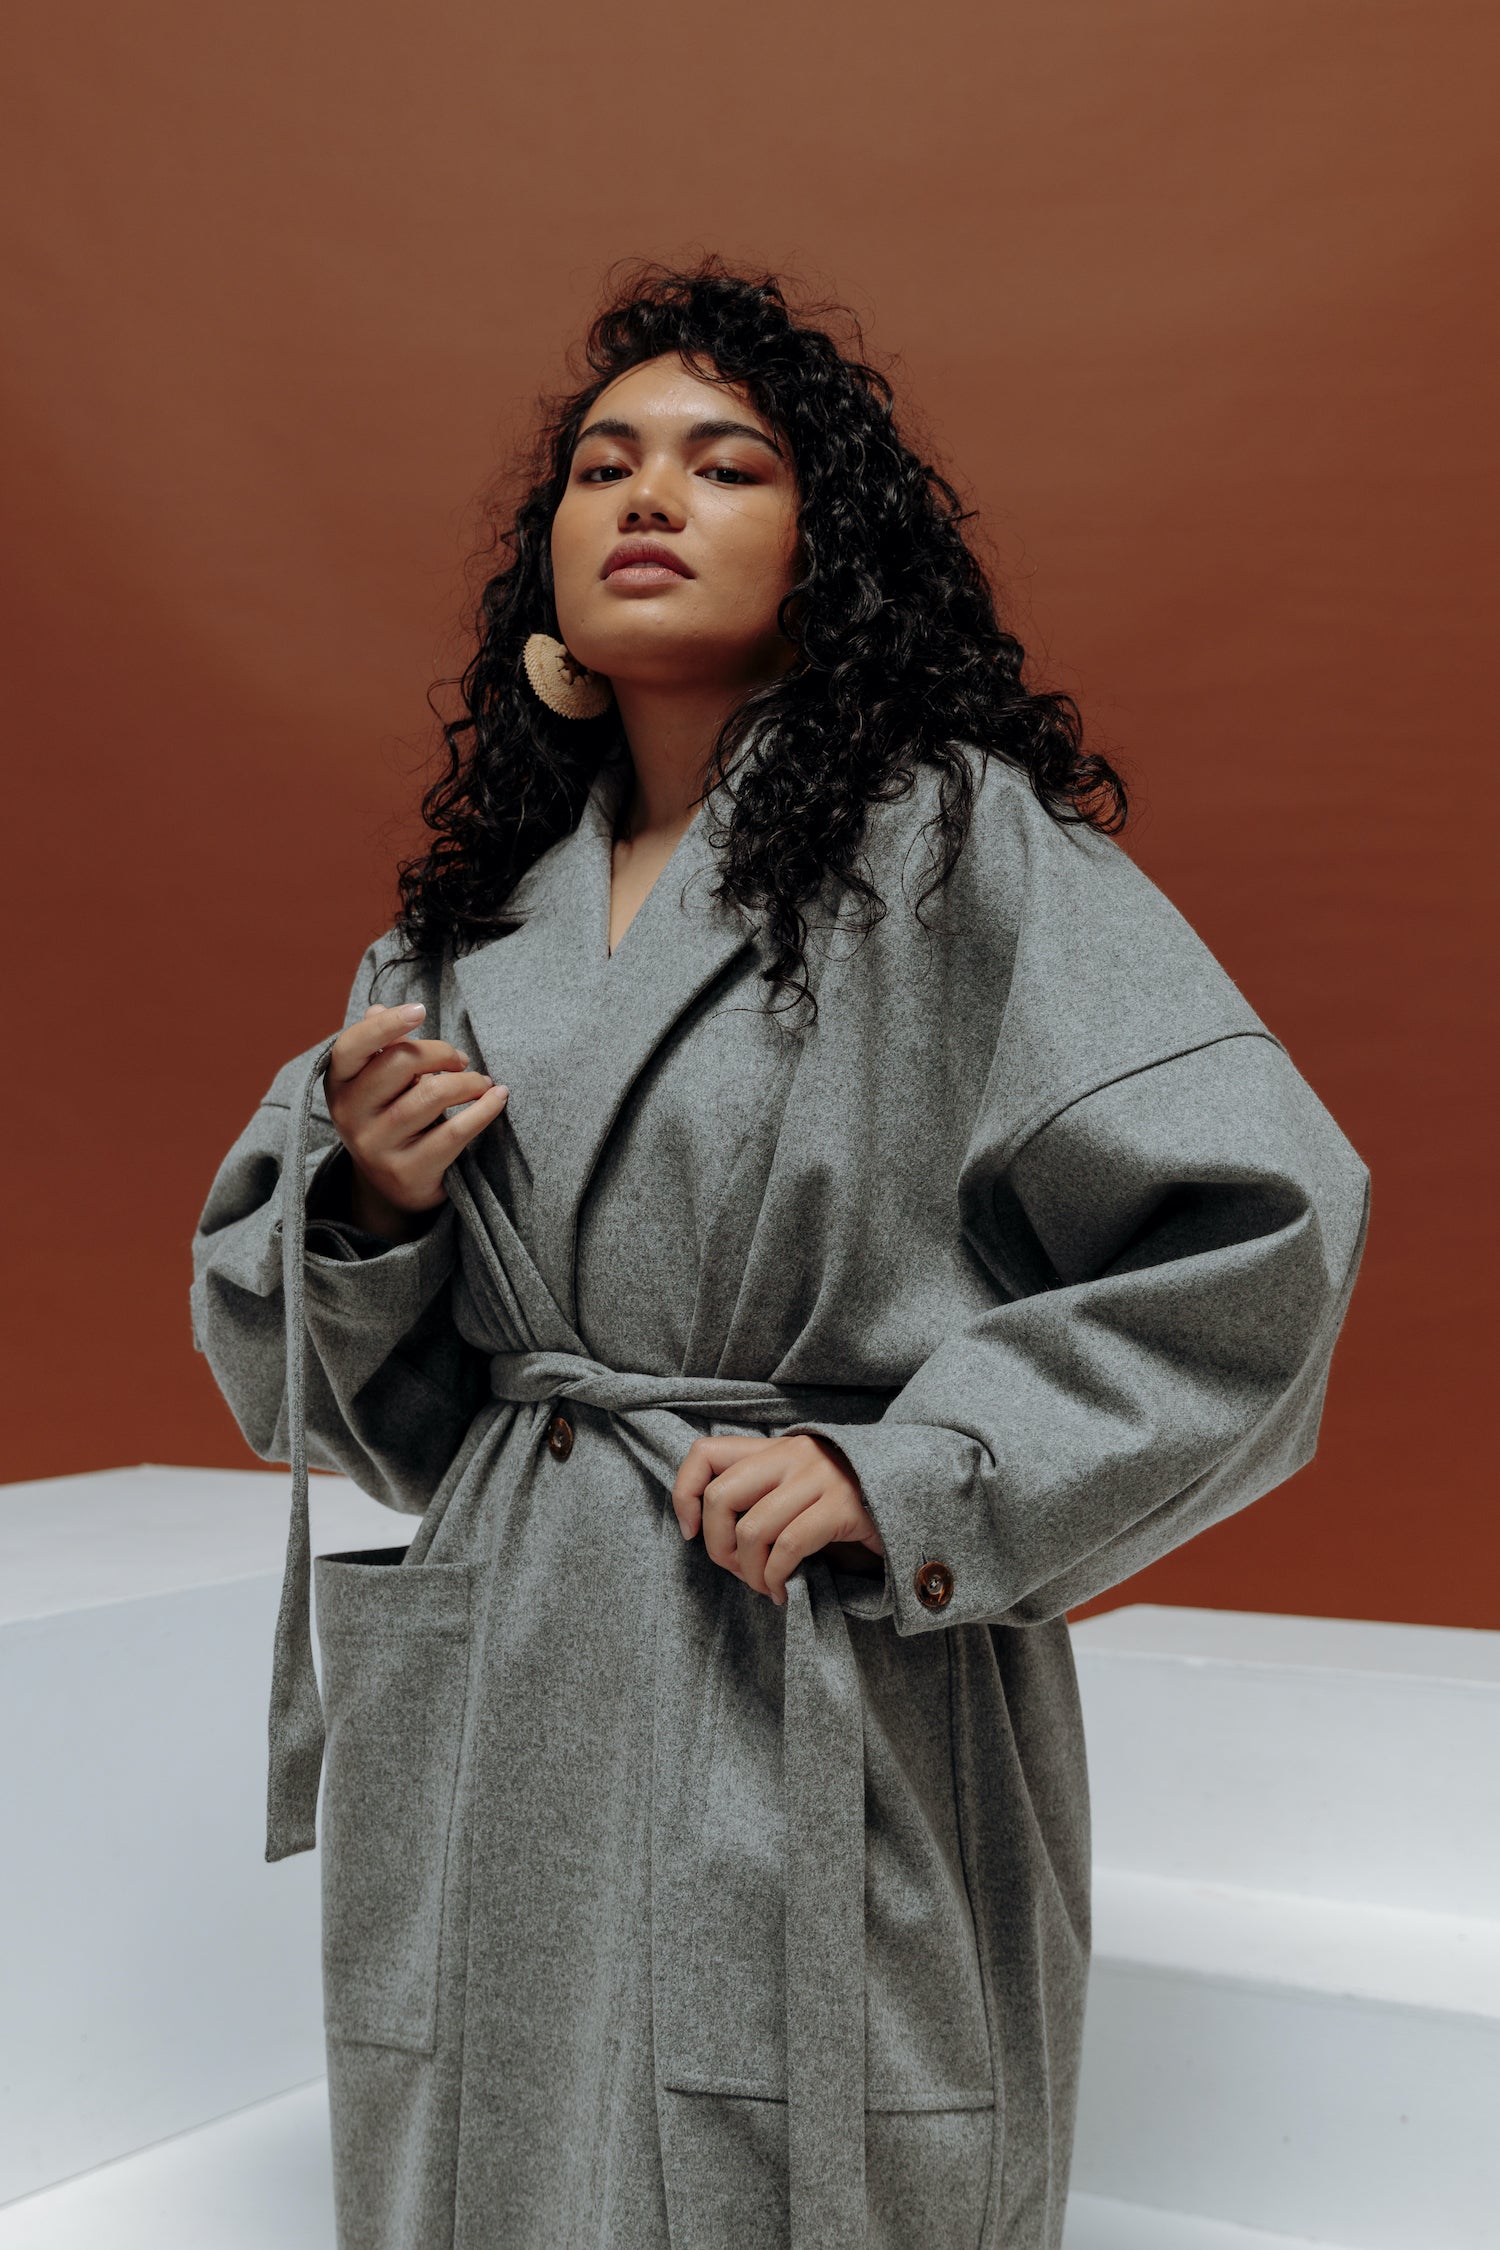 Jalaina wearing a long grey wool coat pulling the tie around her waist